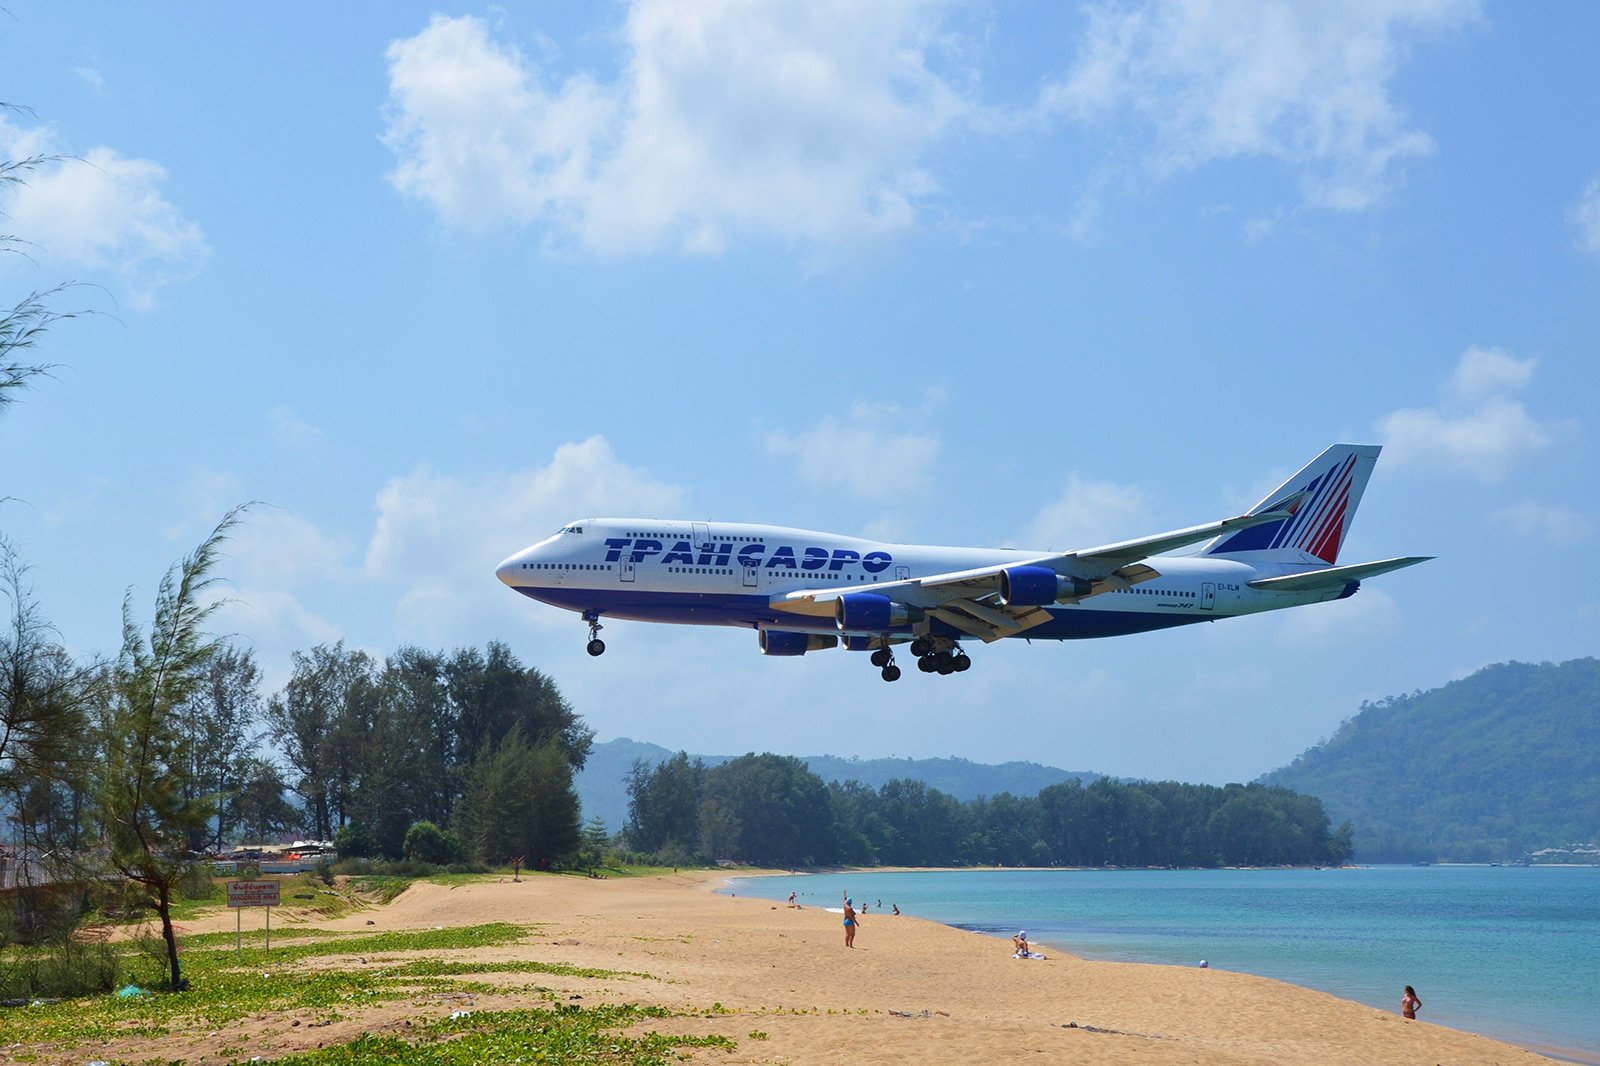 How to watch the plane landing in a glissade in Phuket